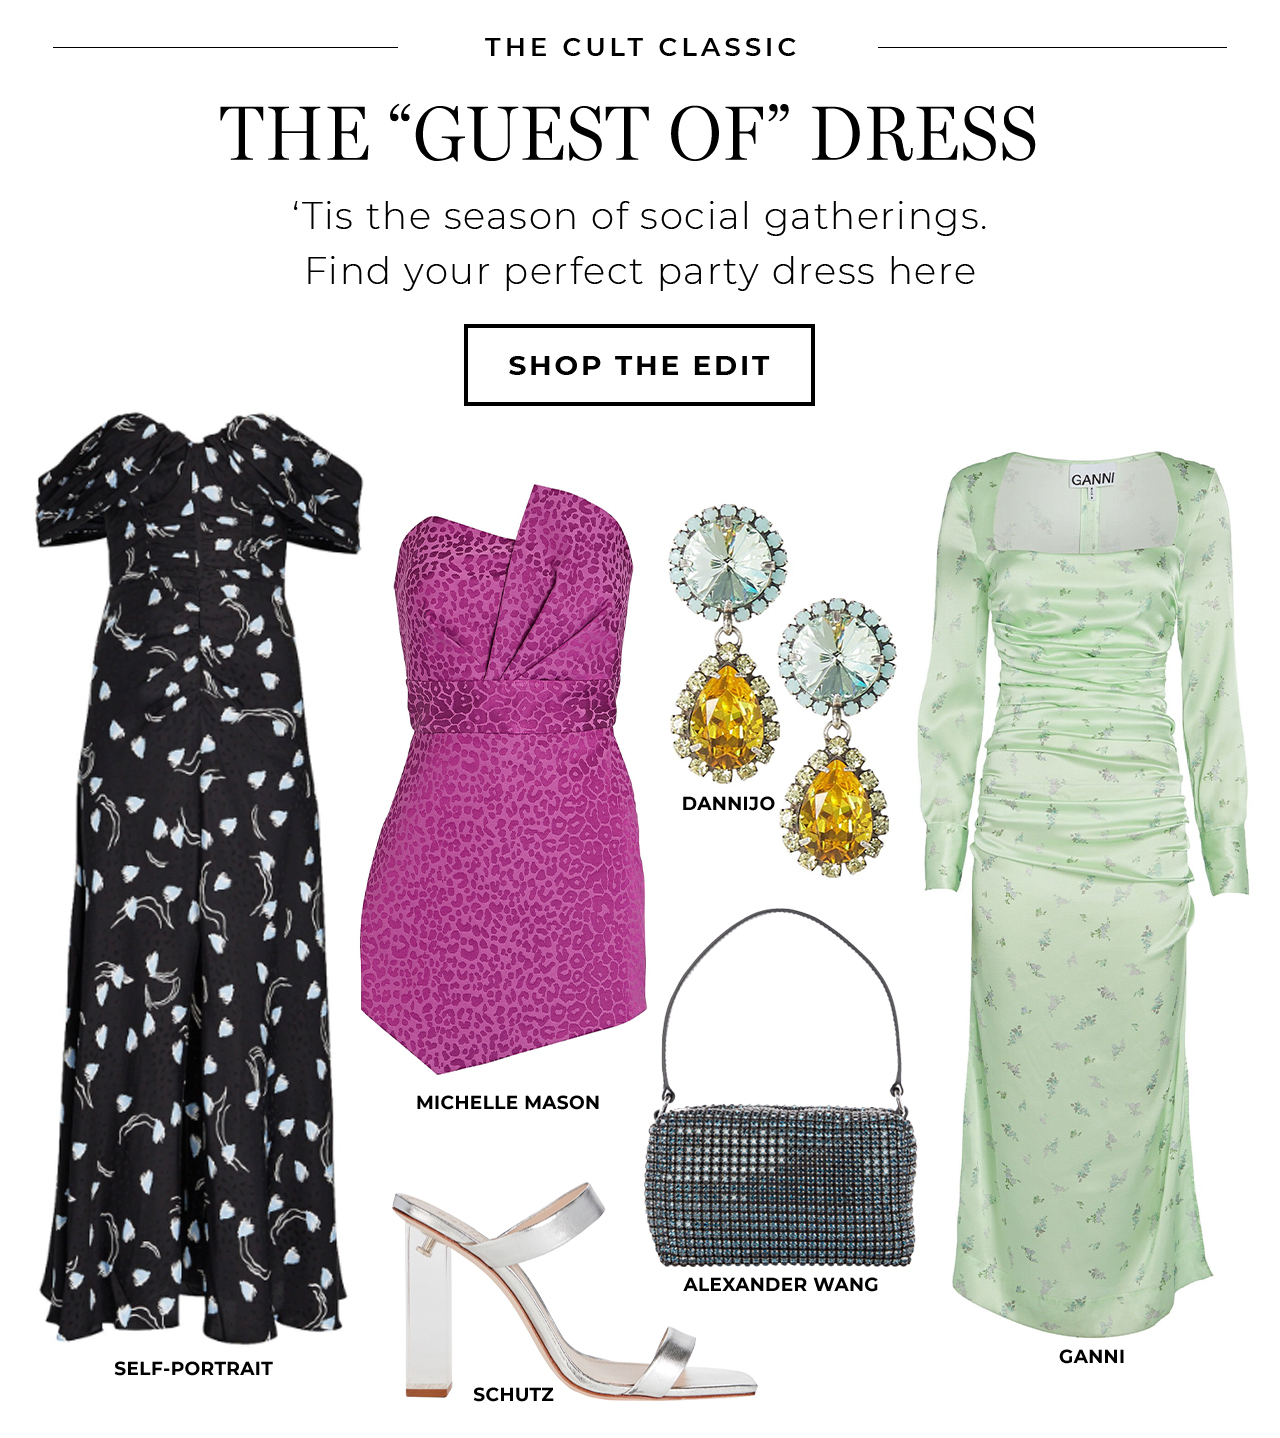 'Tis the season of social gatherings. Find your perfect party dress here